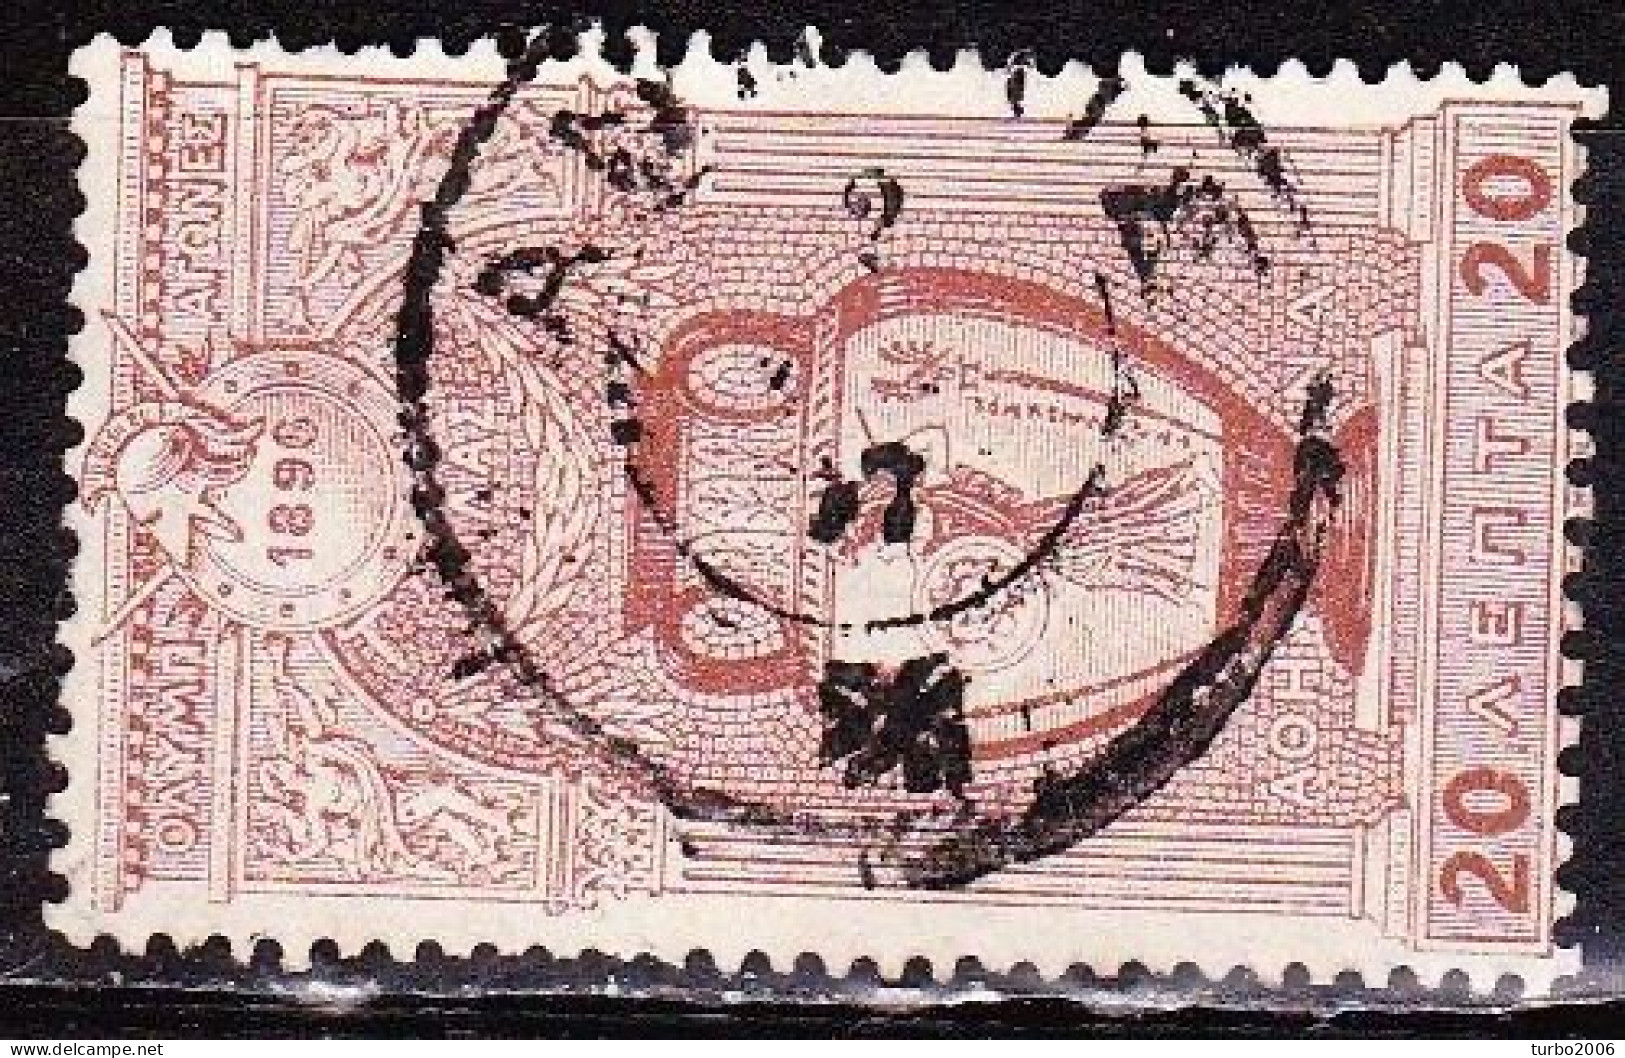 1896 First Olympic Games 20 L Brown Vl. 137 Cancellation ΑΜΟΡΓΟΣ Type V - Used Stamps